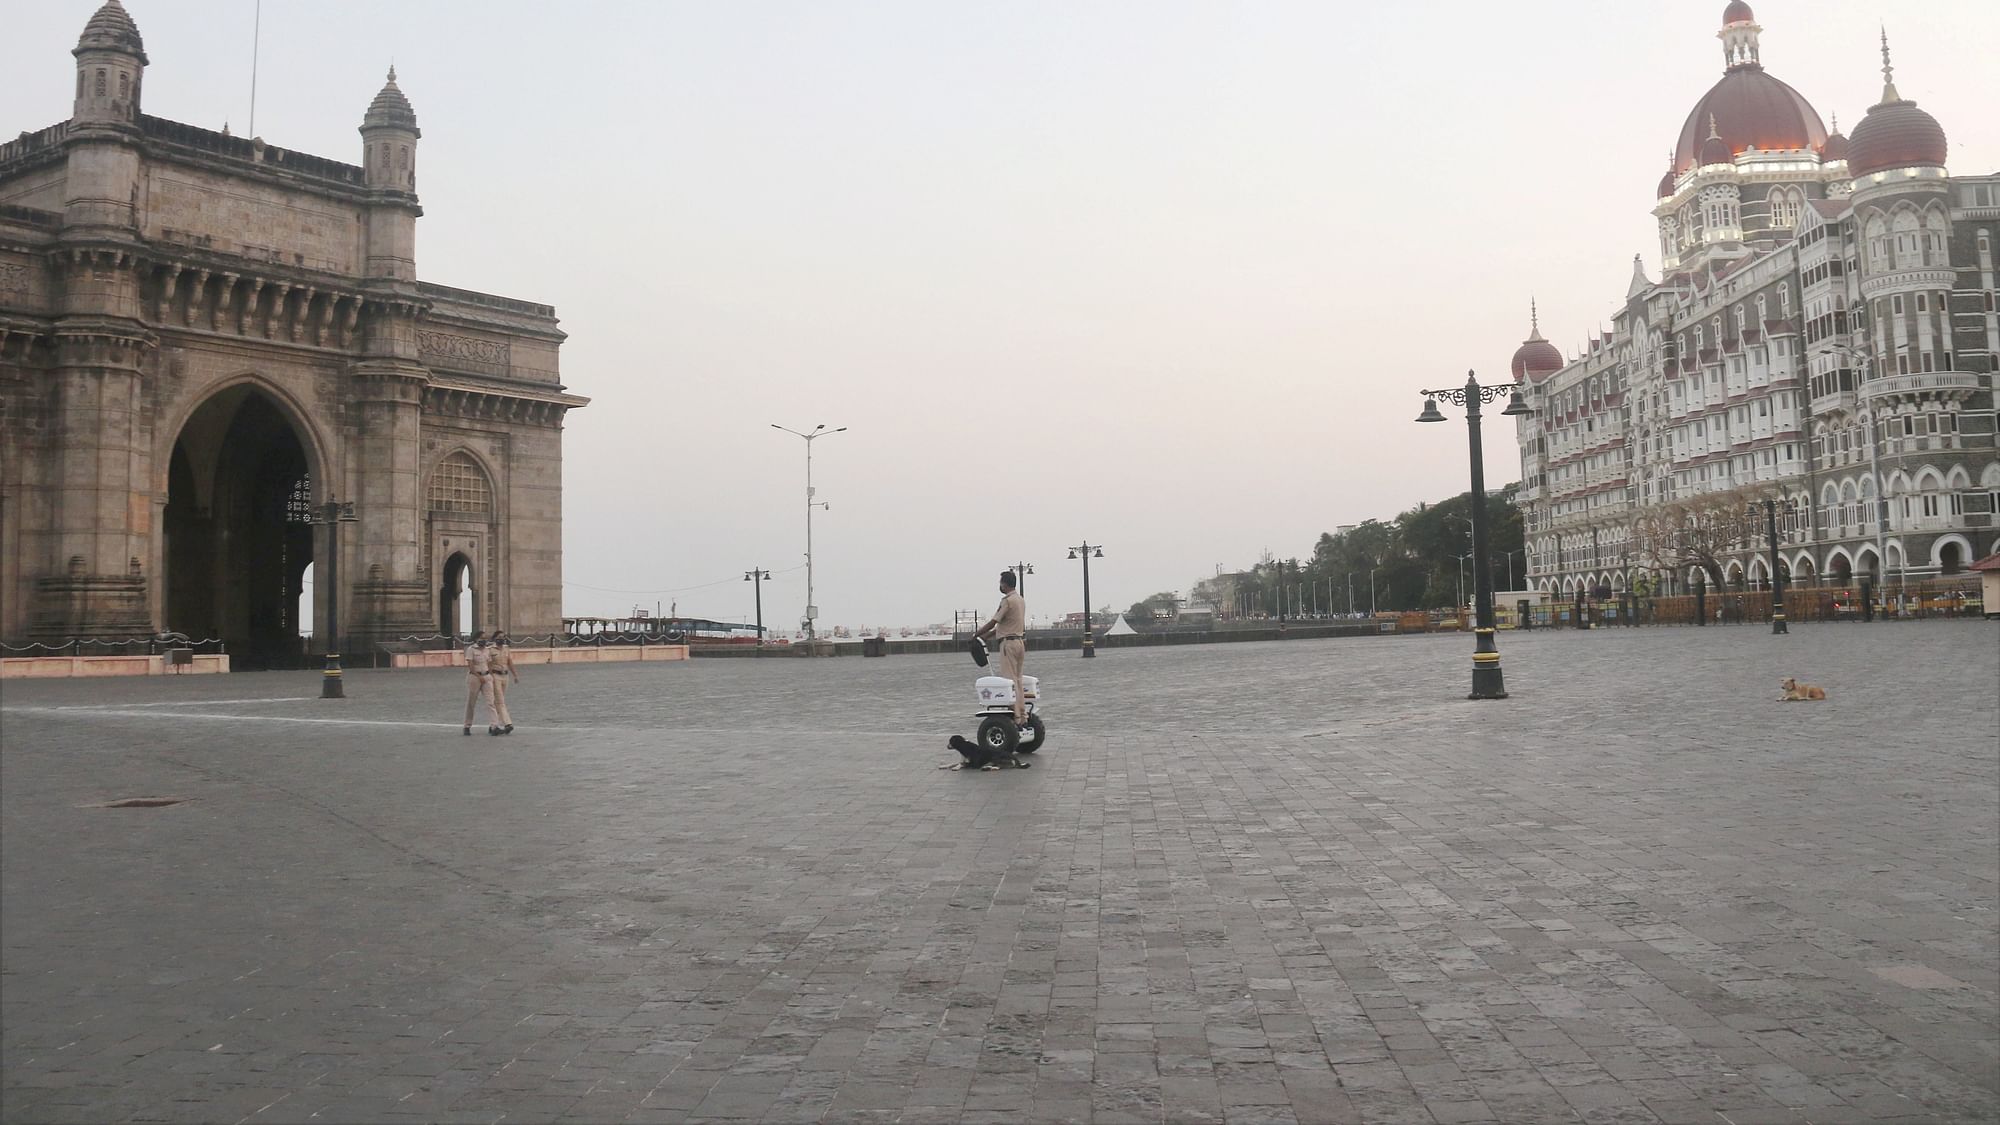 Police officers patrol the deserted Gateway of India, after authorities closed all public spaces due to surge in COVID-19 cases, in Mumbai on Monday, 5 April.